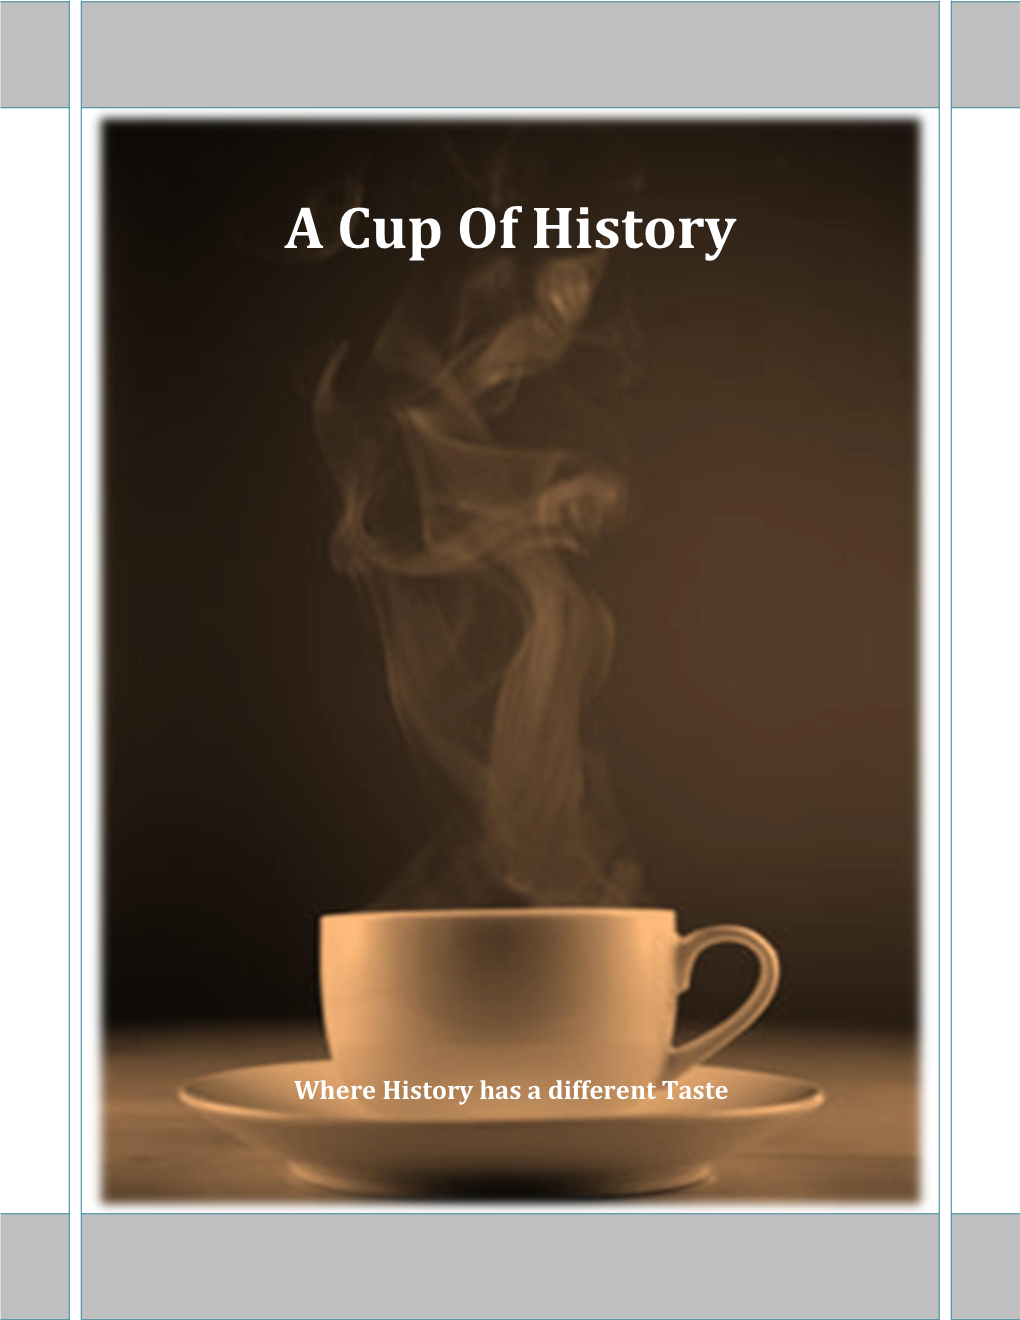 A Cup of History Magazine